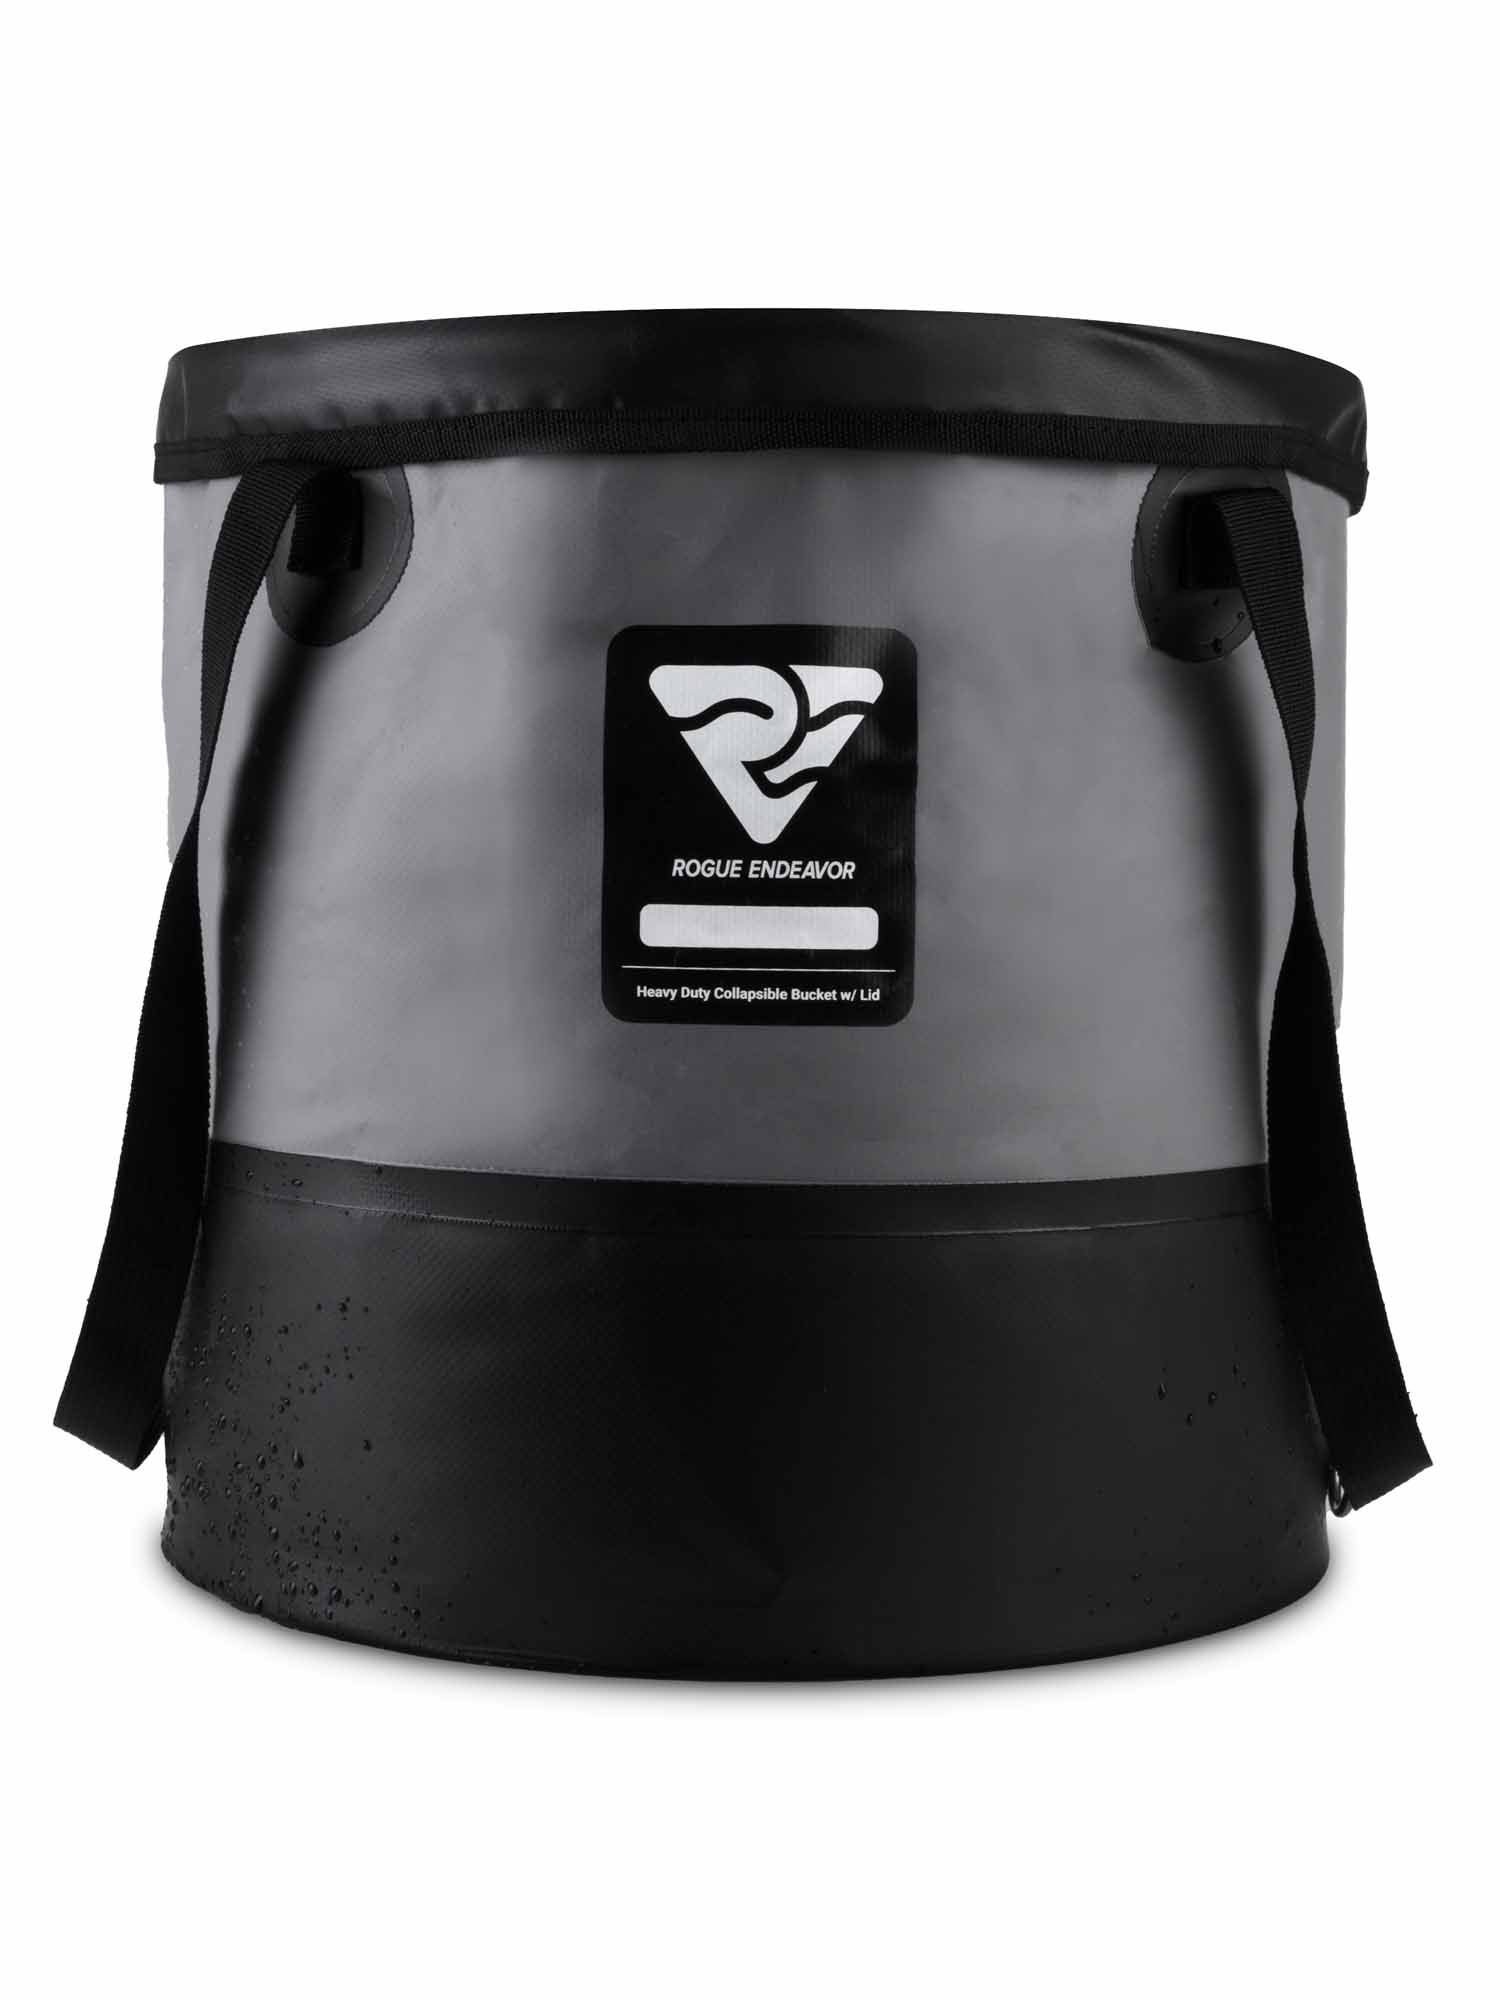 Collapsible Bucket with Lid (5 Gallon) – RogueEndeavor